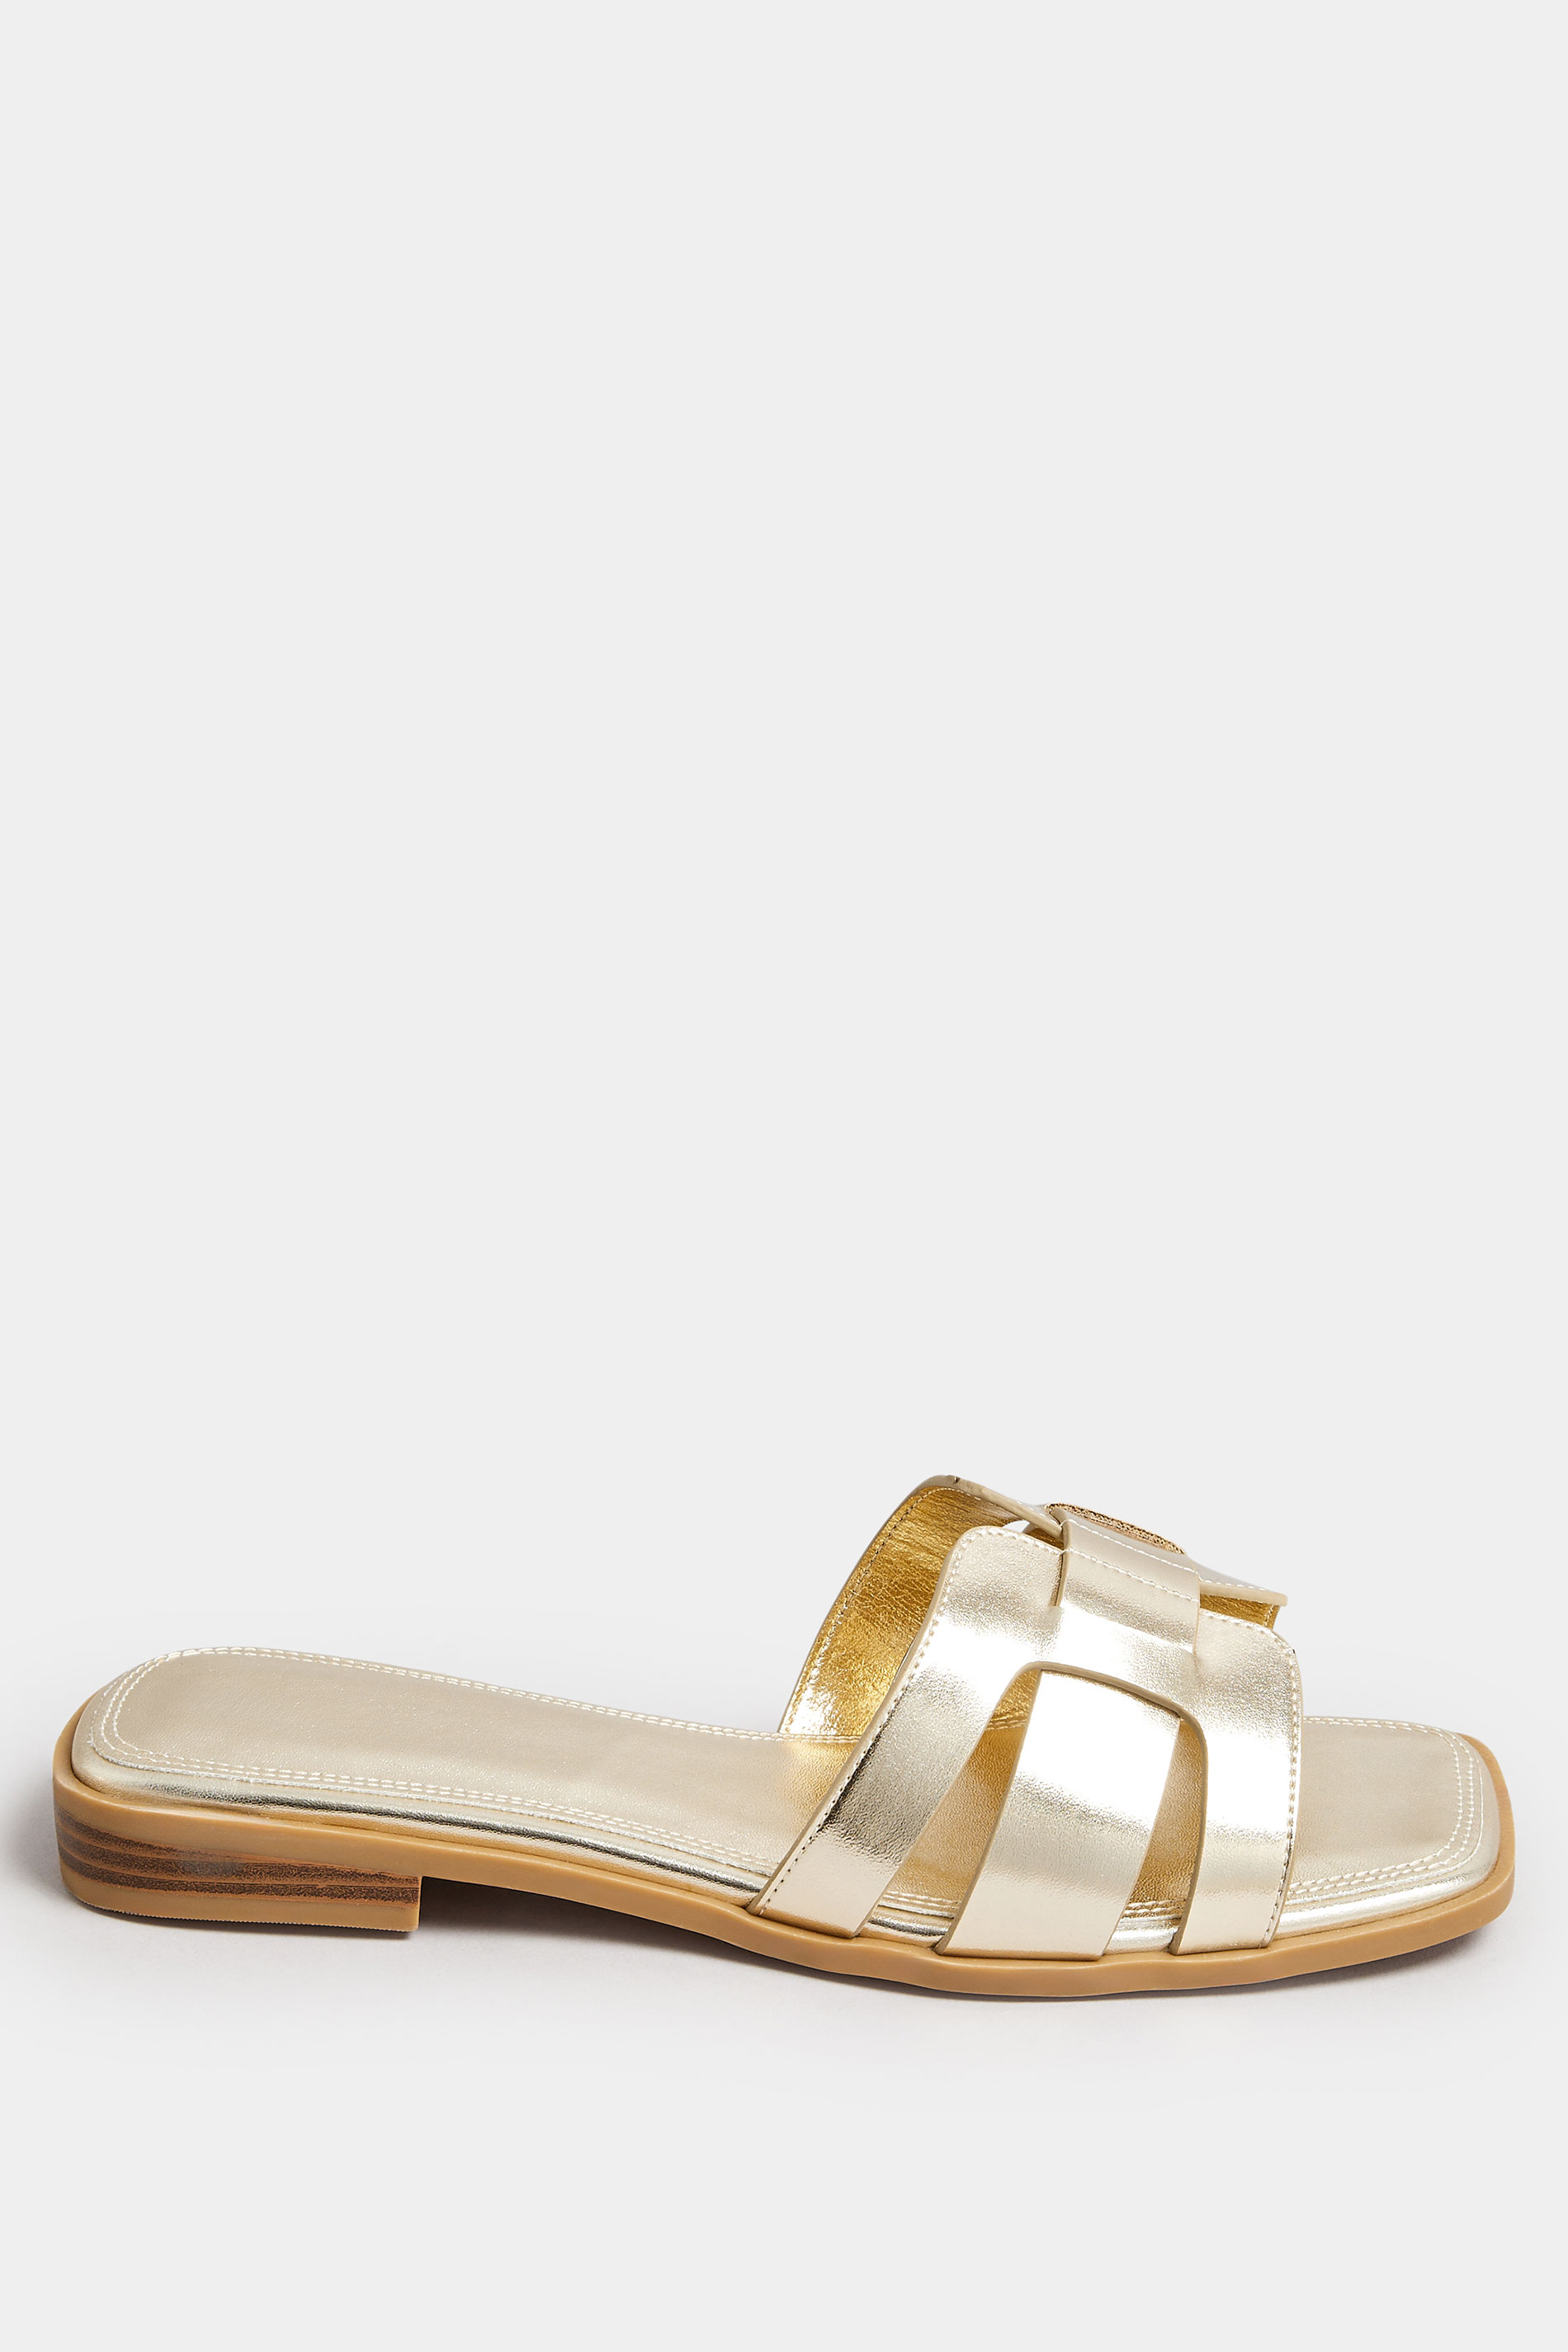 Gold Cut Out Mule Sandals In Extra Wide EEE Fit | Yours Clothing 3